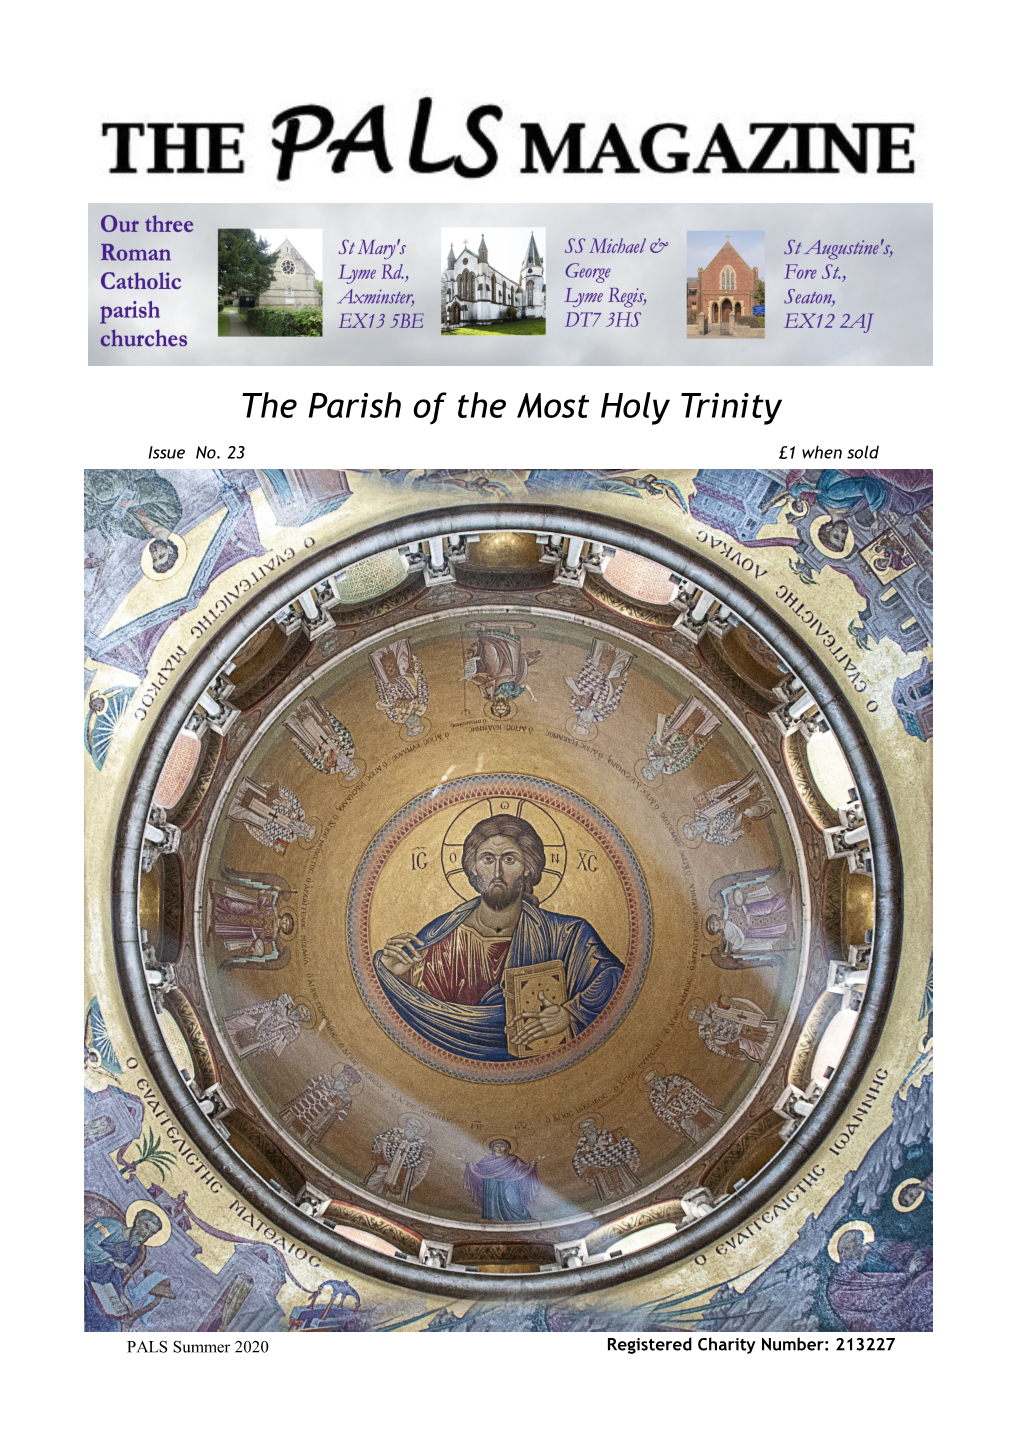 The Parish of the Most Holy Trinity